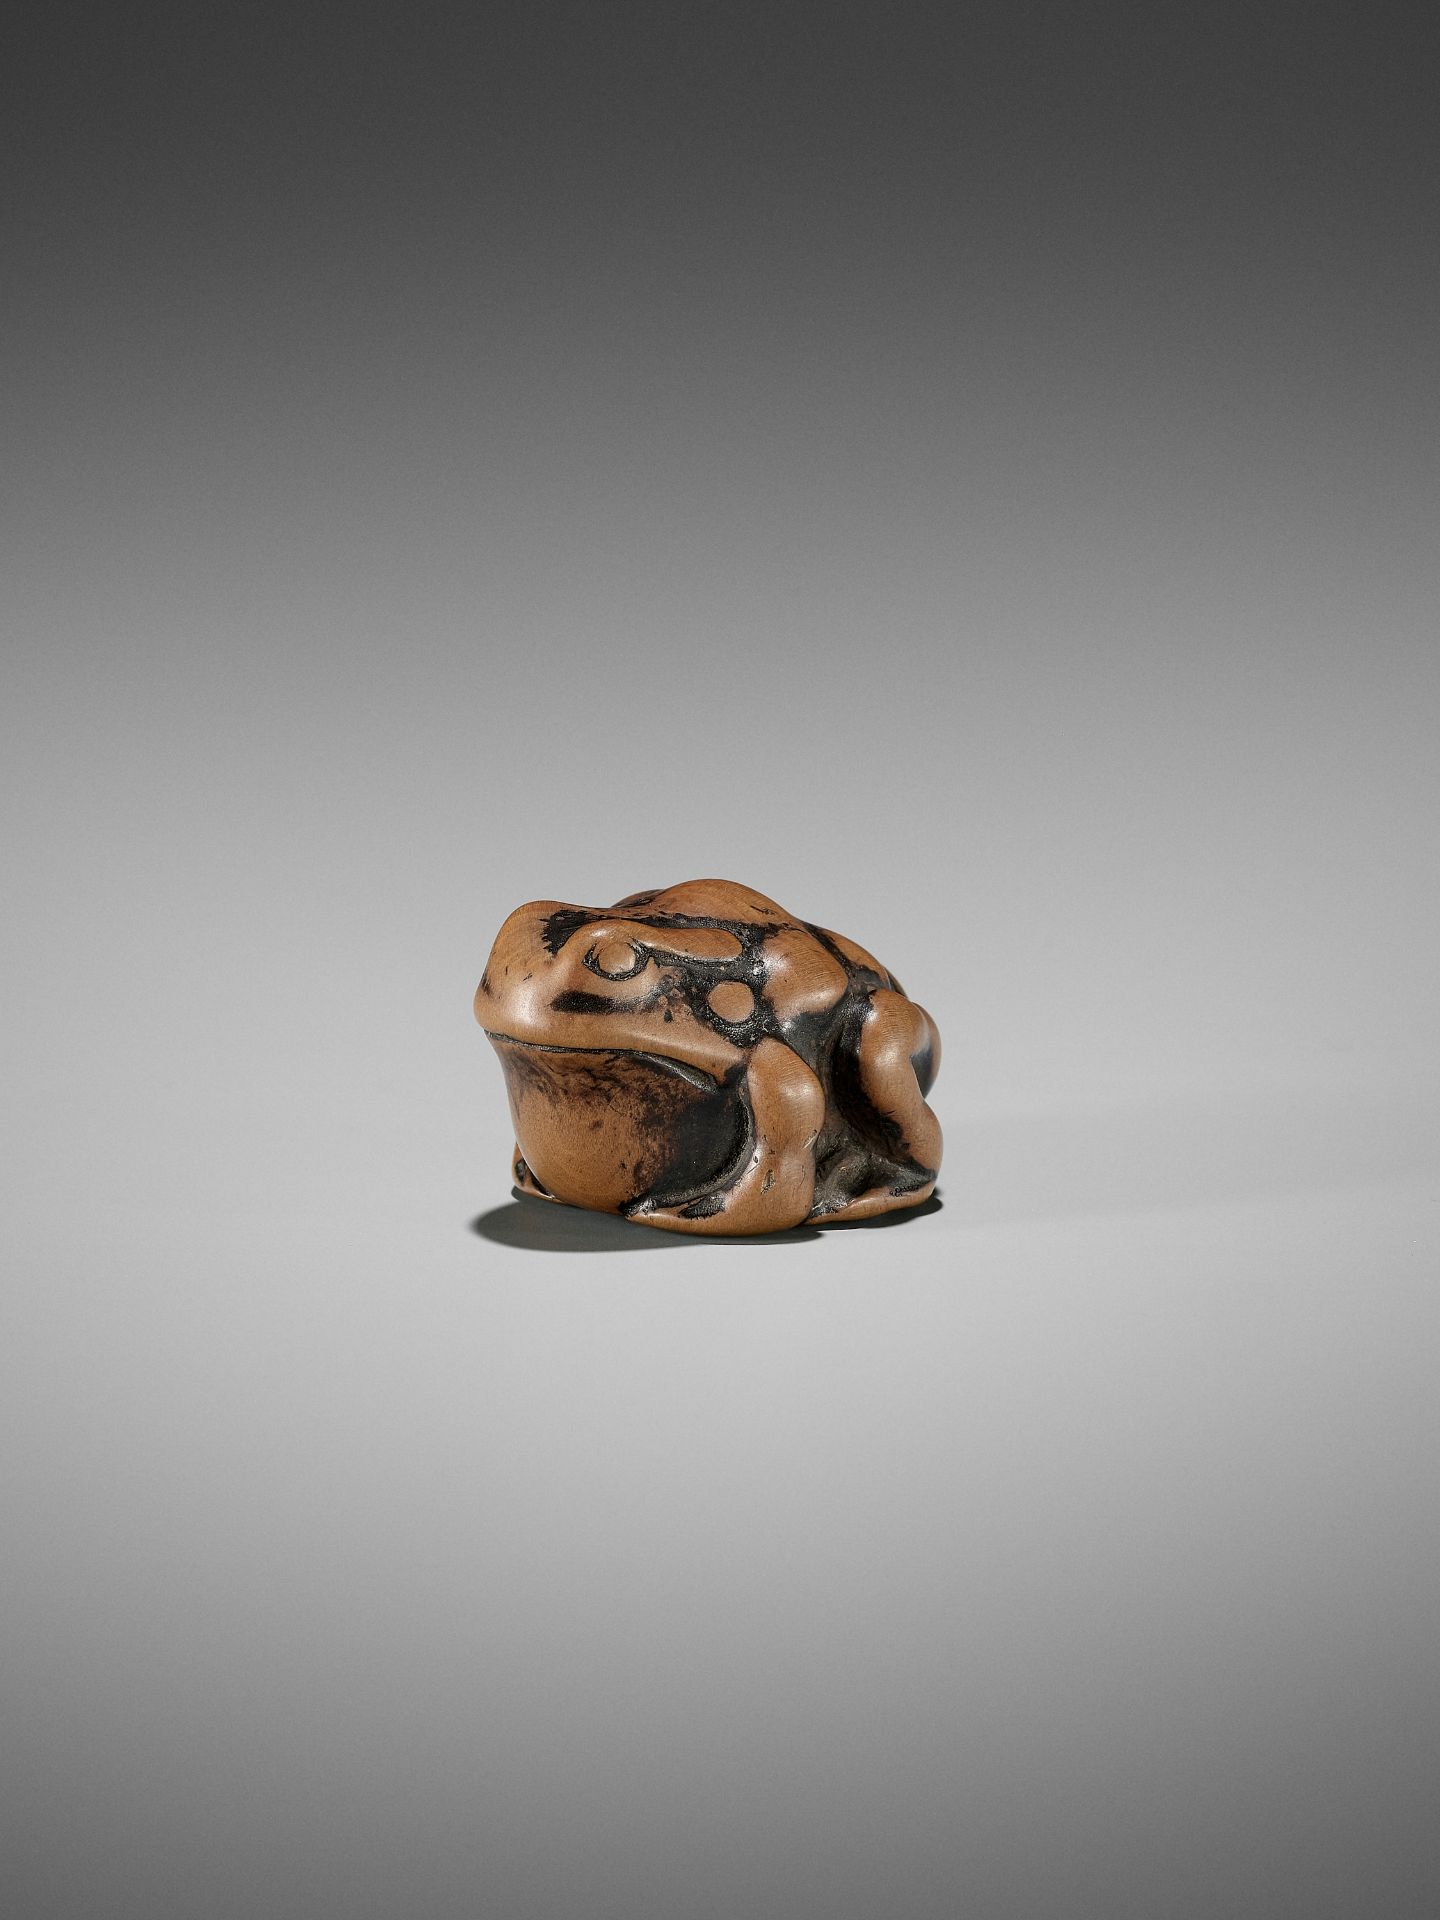 AN EARLY WOOD NETSUKE OF A TOAD - Image 10 of 12